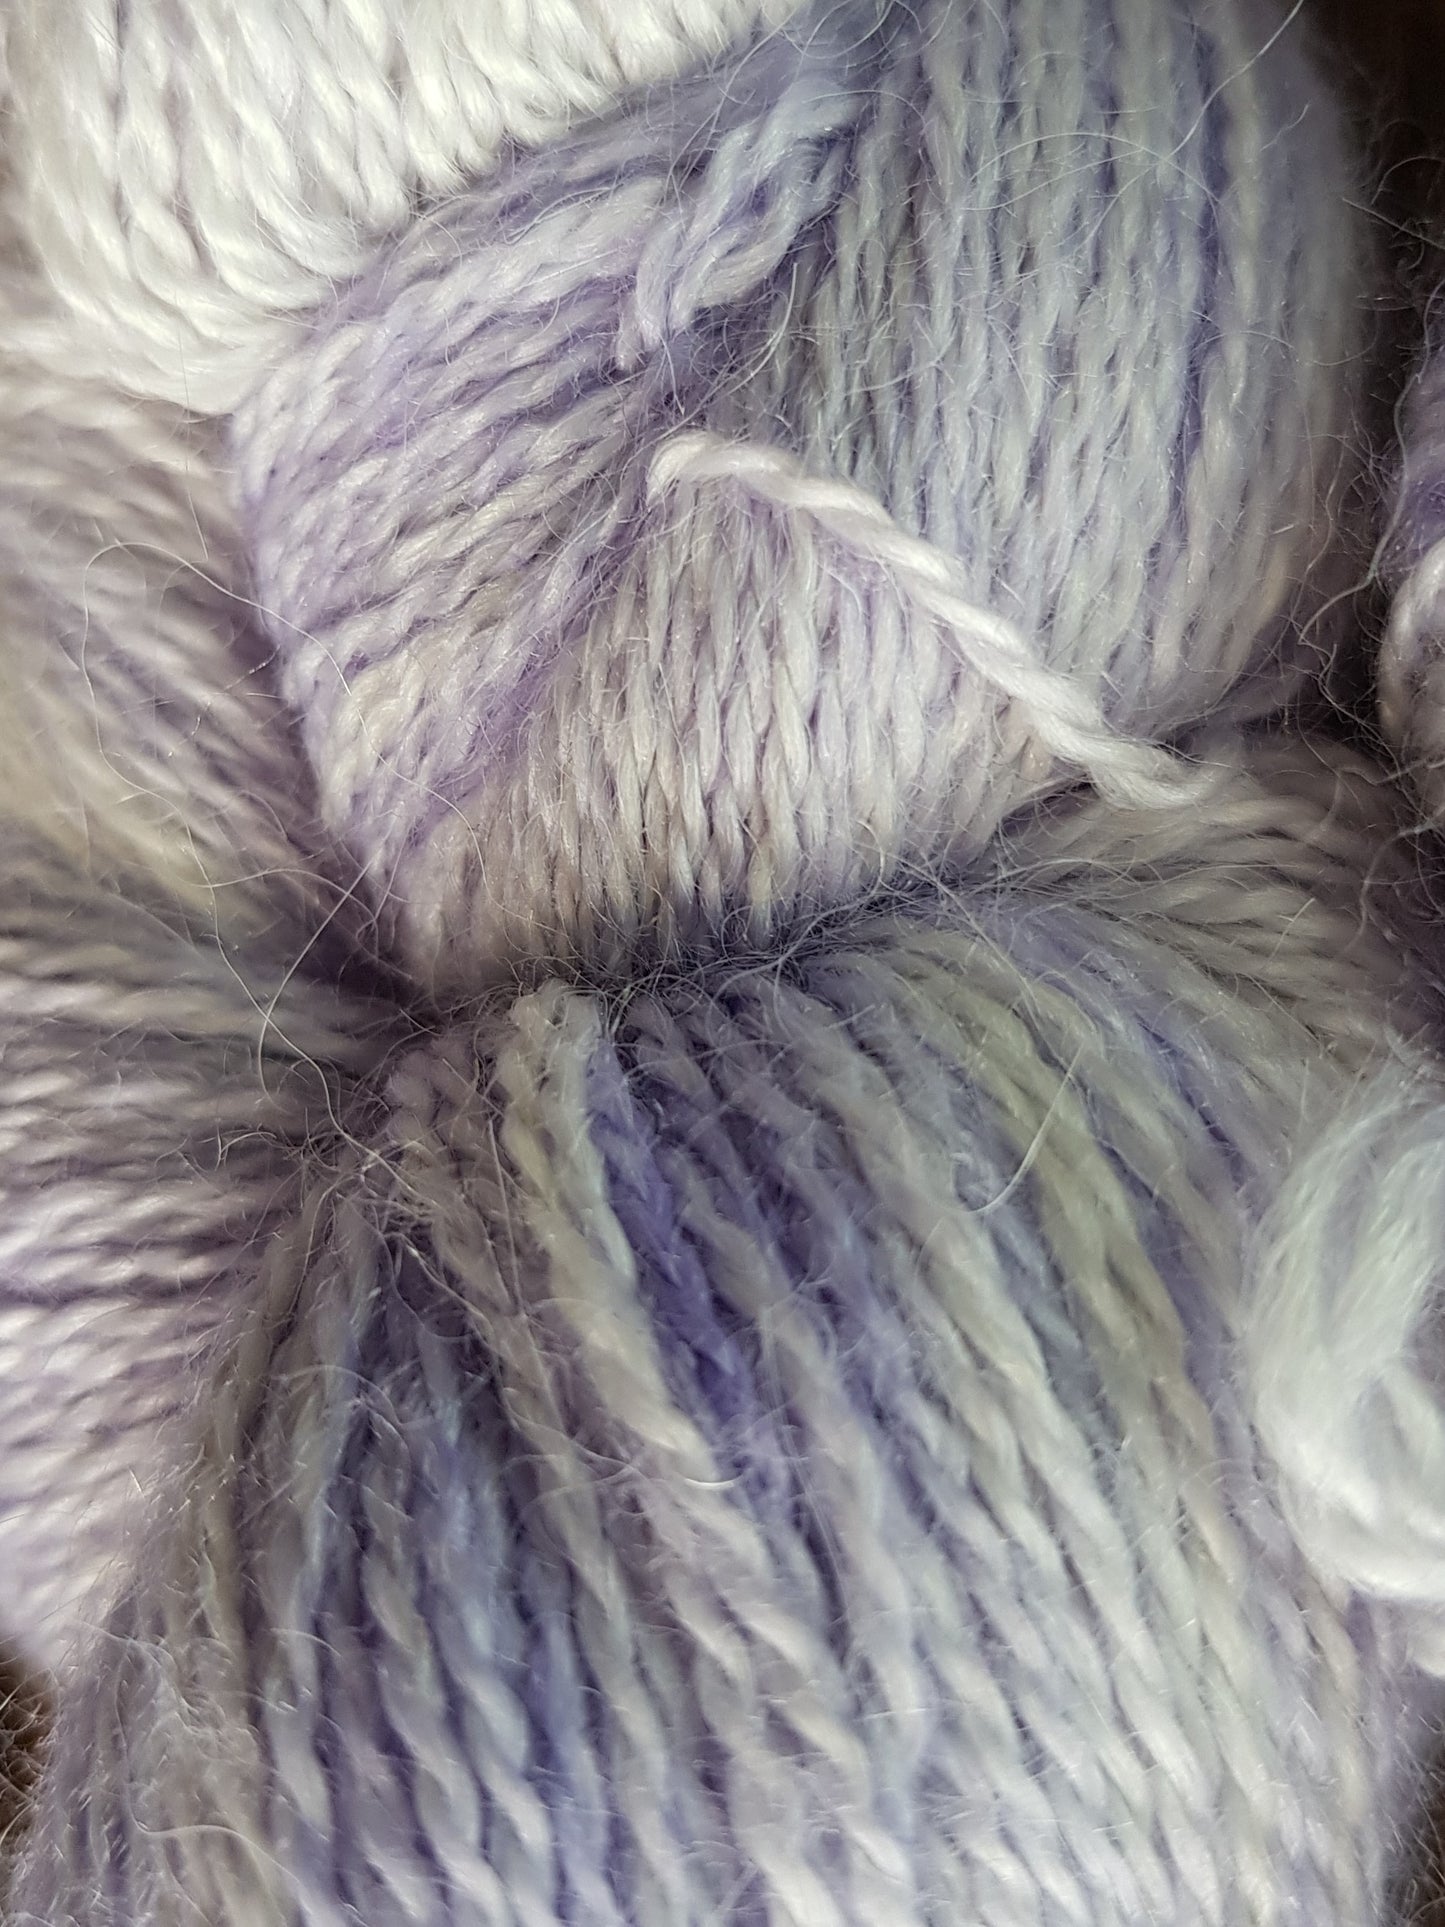 100G BFL/Silk hand dyed Lace Weight Yarn- "A Touch of Frost" - *SALE*